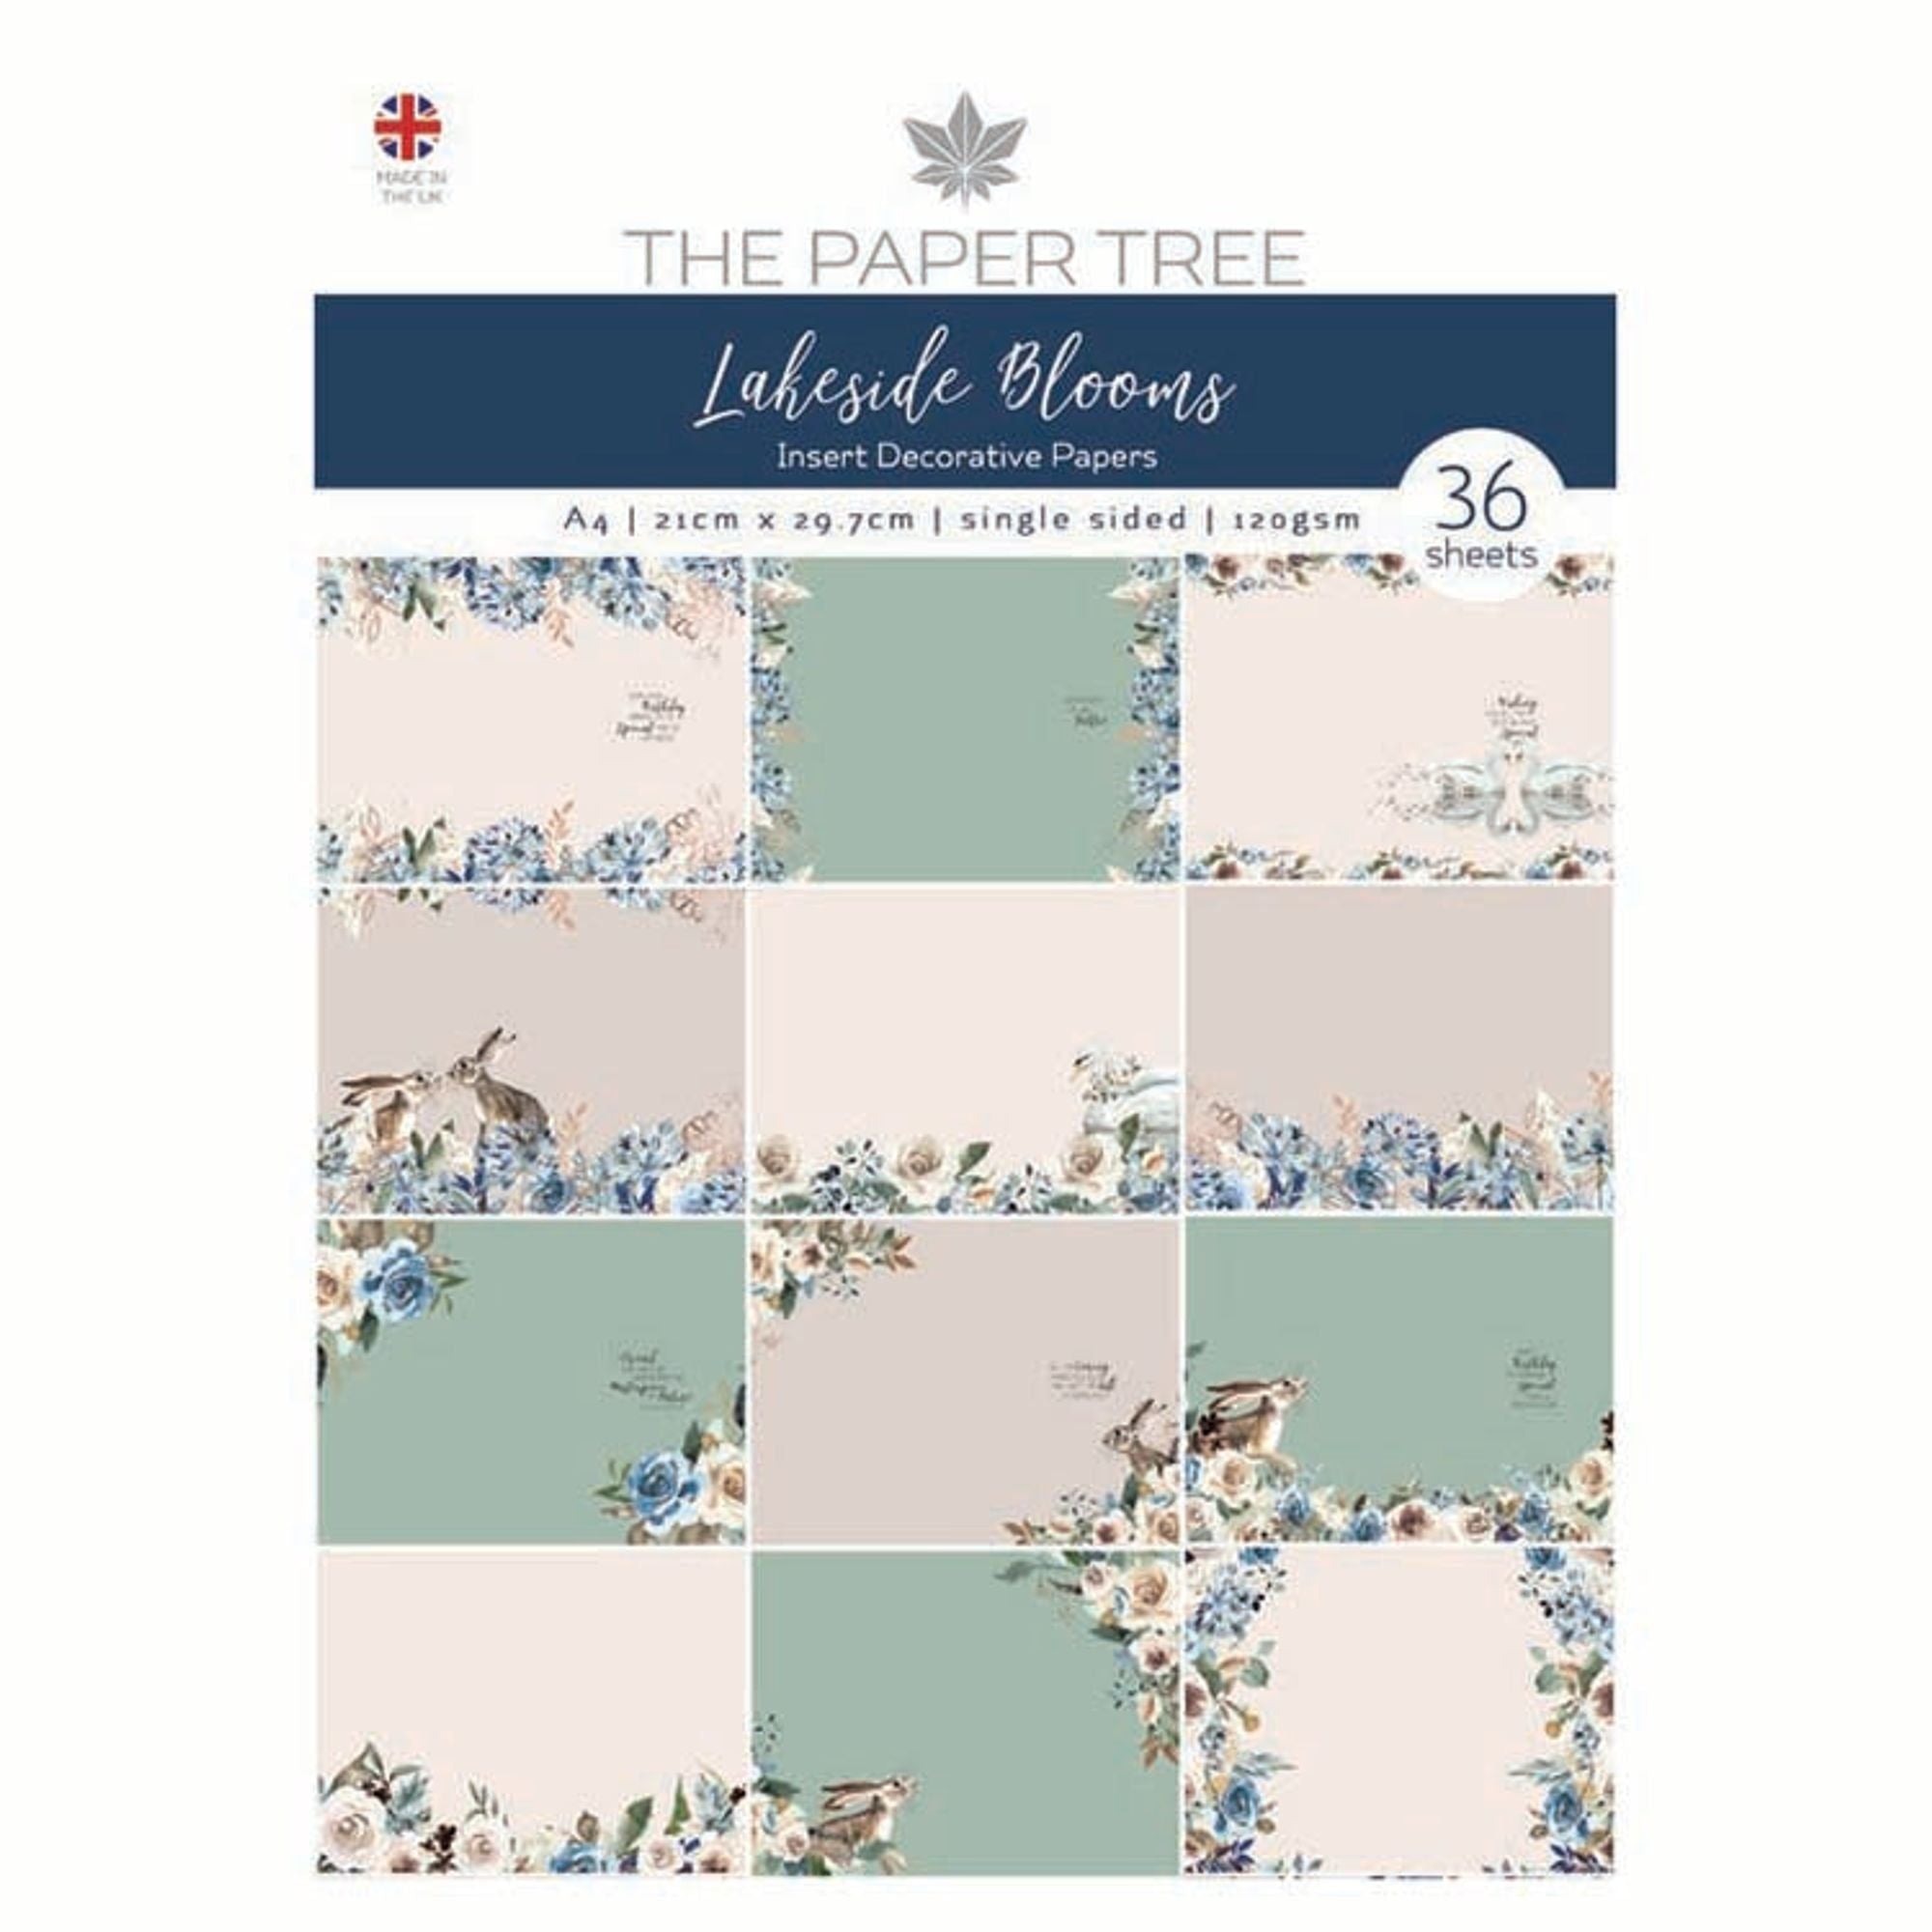 The Paper Tree Lakeside Blooms Insert Collection